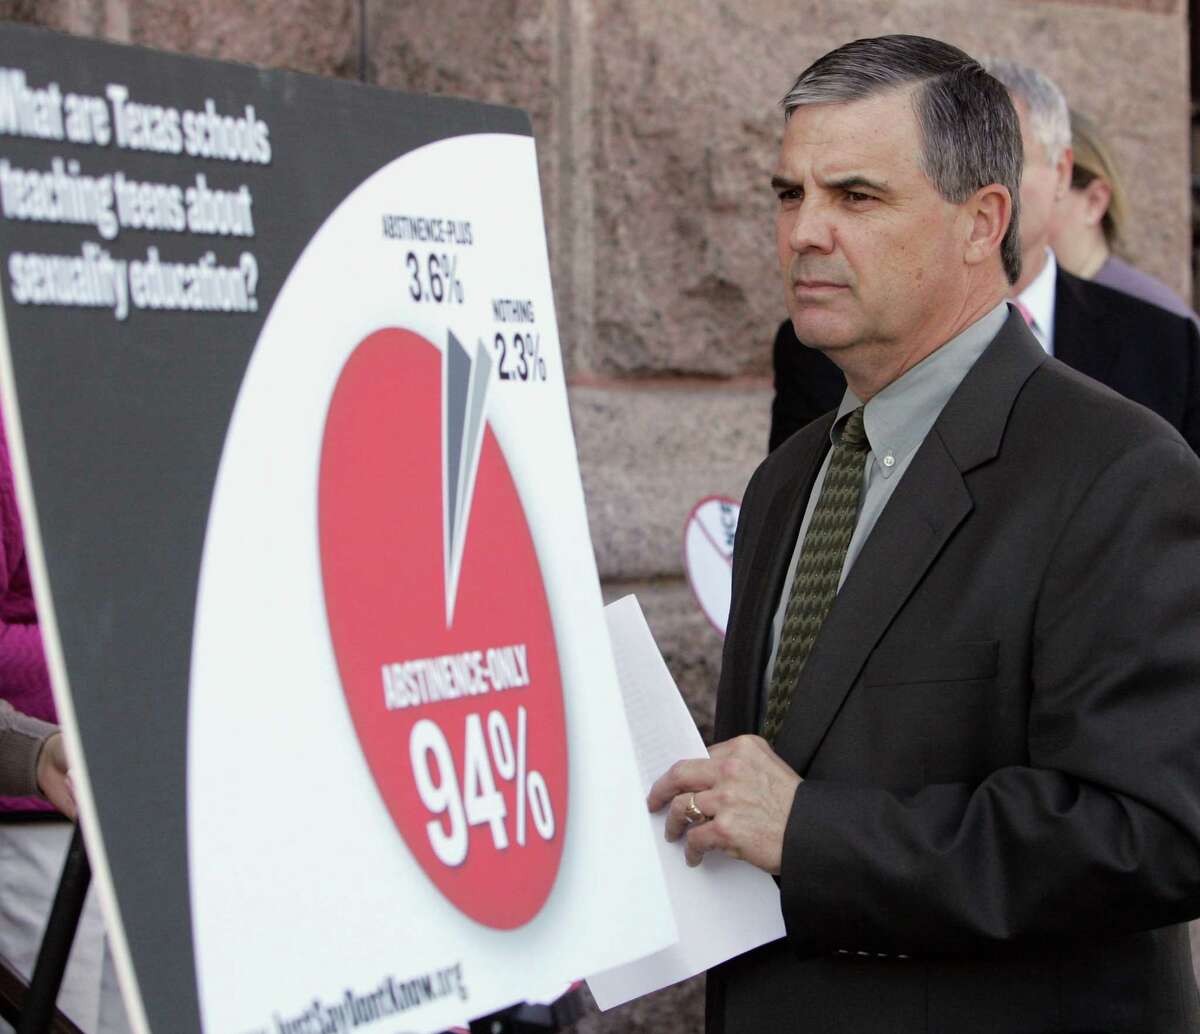 David Wiley, professor of health education at Texas State University-San Marcos, pauses before speaking about sex education at a Texas Freedom Network news conference outside the Capitol Tuesday, Feb. 24, 2009, in Austin, Texas. (AP Photo/Harry Cabluck)